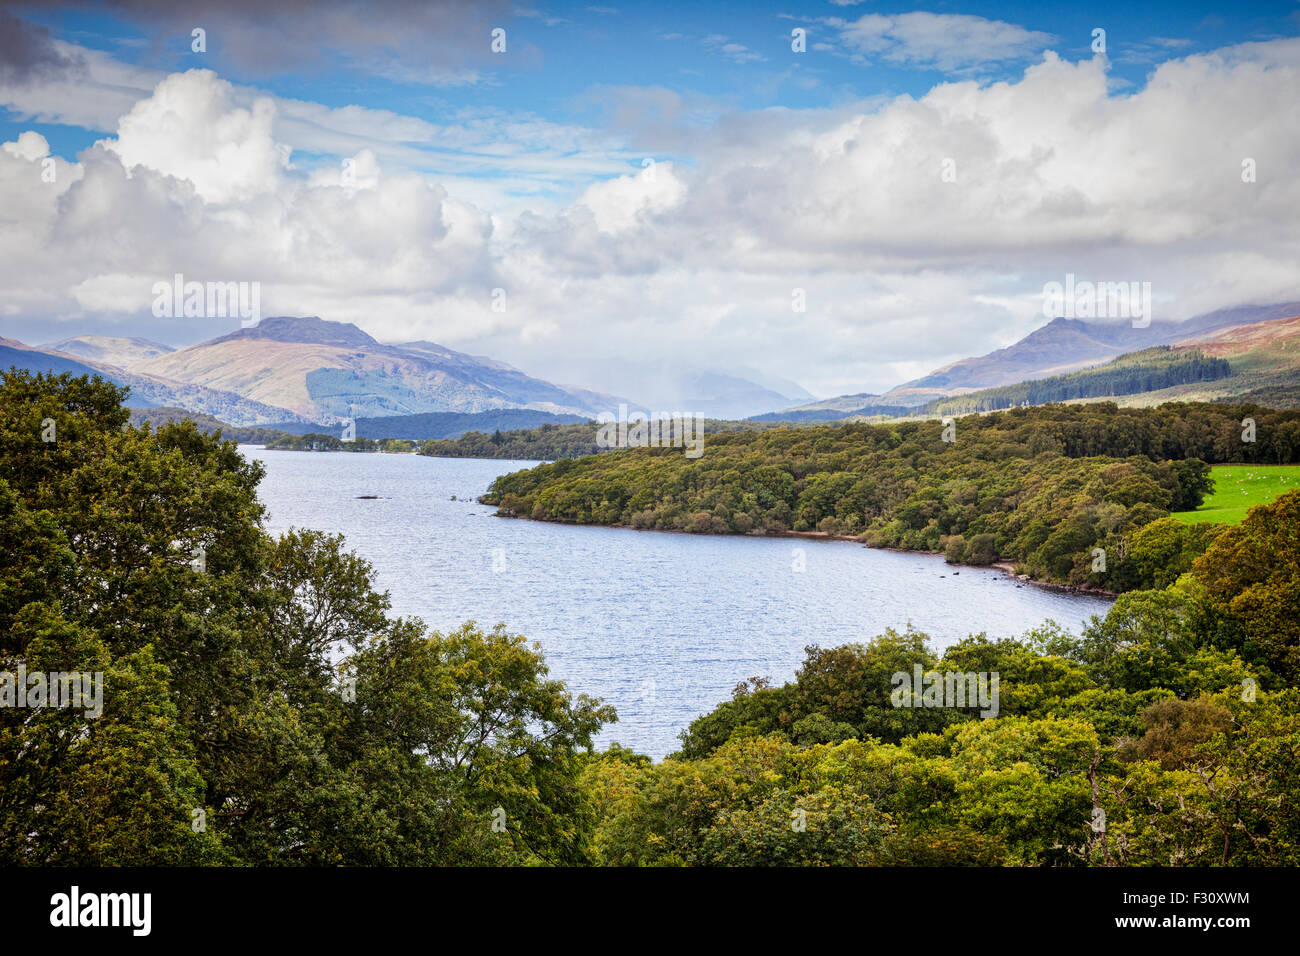 Loch Lomond and the Trossachs National Park from Craigiefort, Stirlingshire, Scotland, UK. Stock Photo